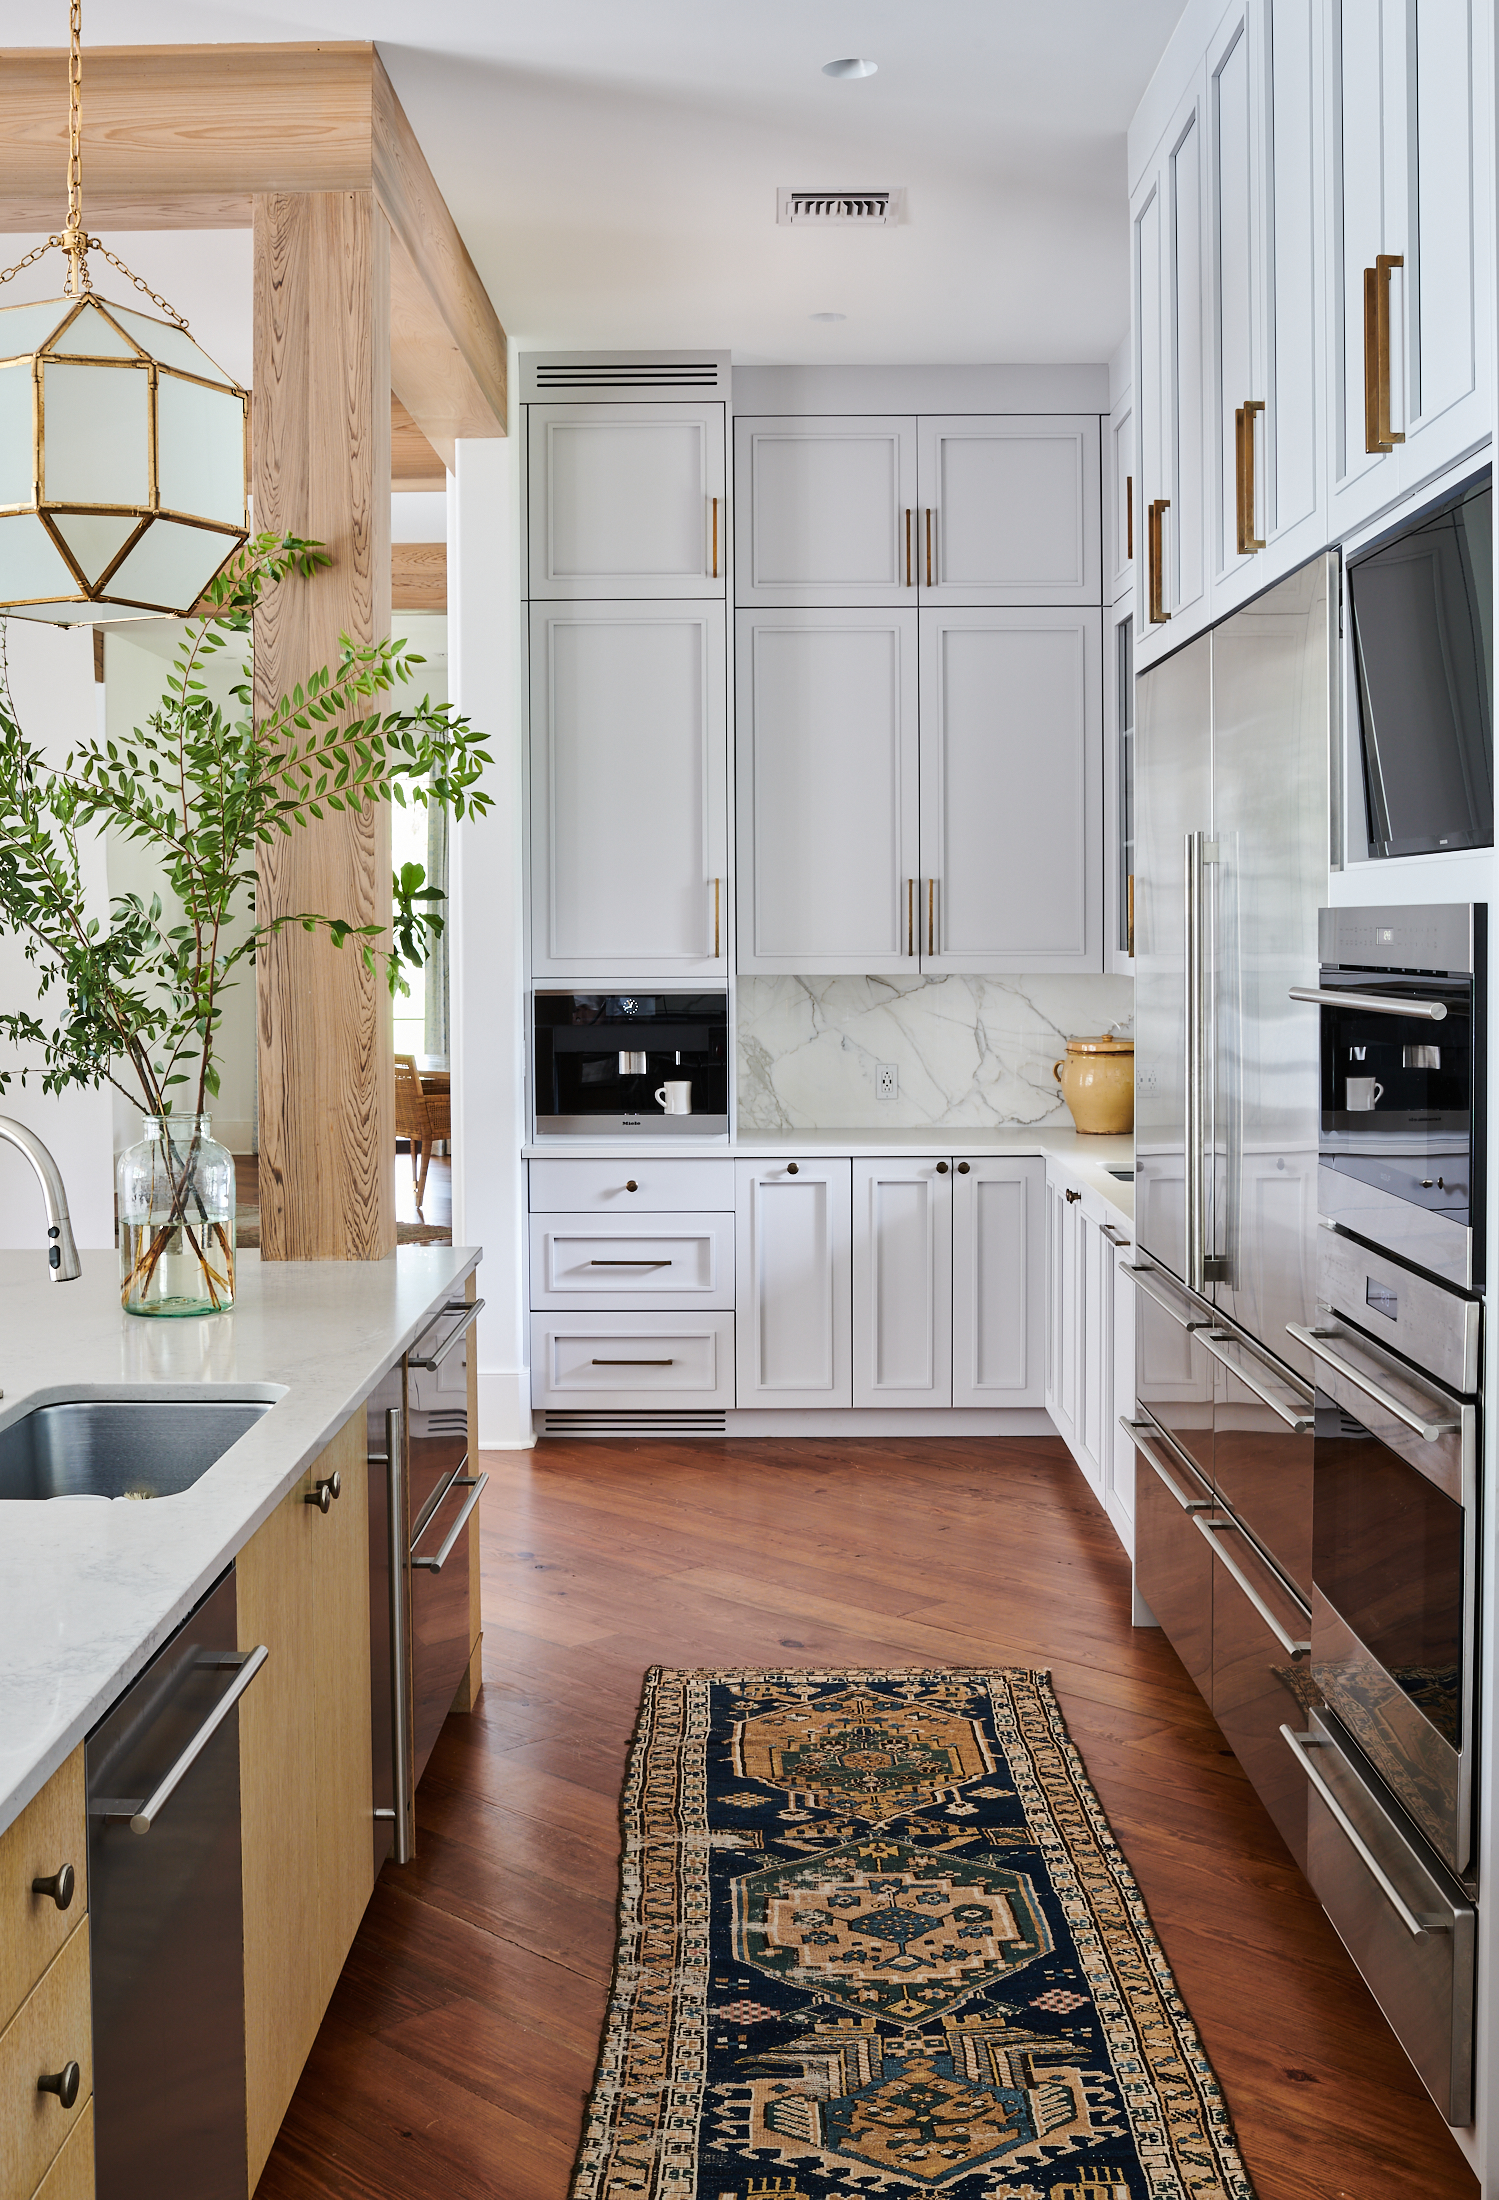 Kitchen cabinerts and built in coffee maker by Alison Gootee Photography for Logan Killen Interiors 